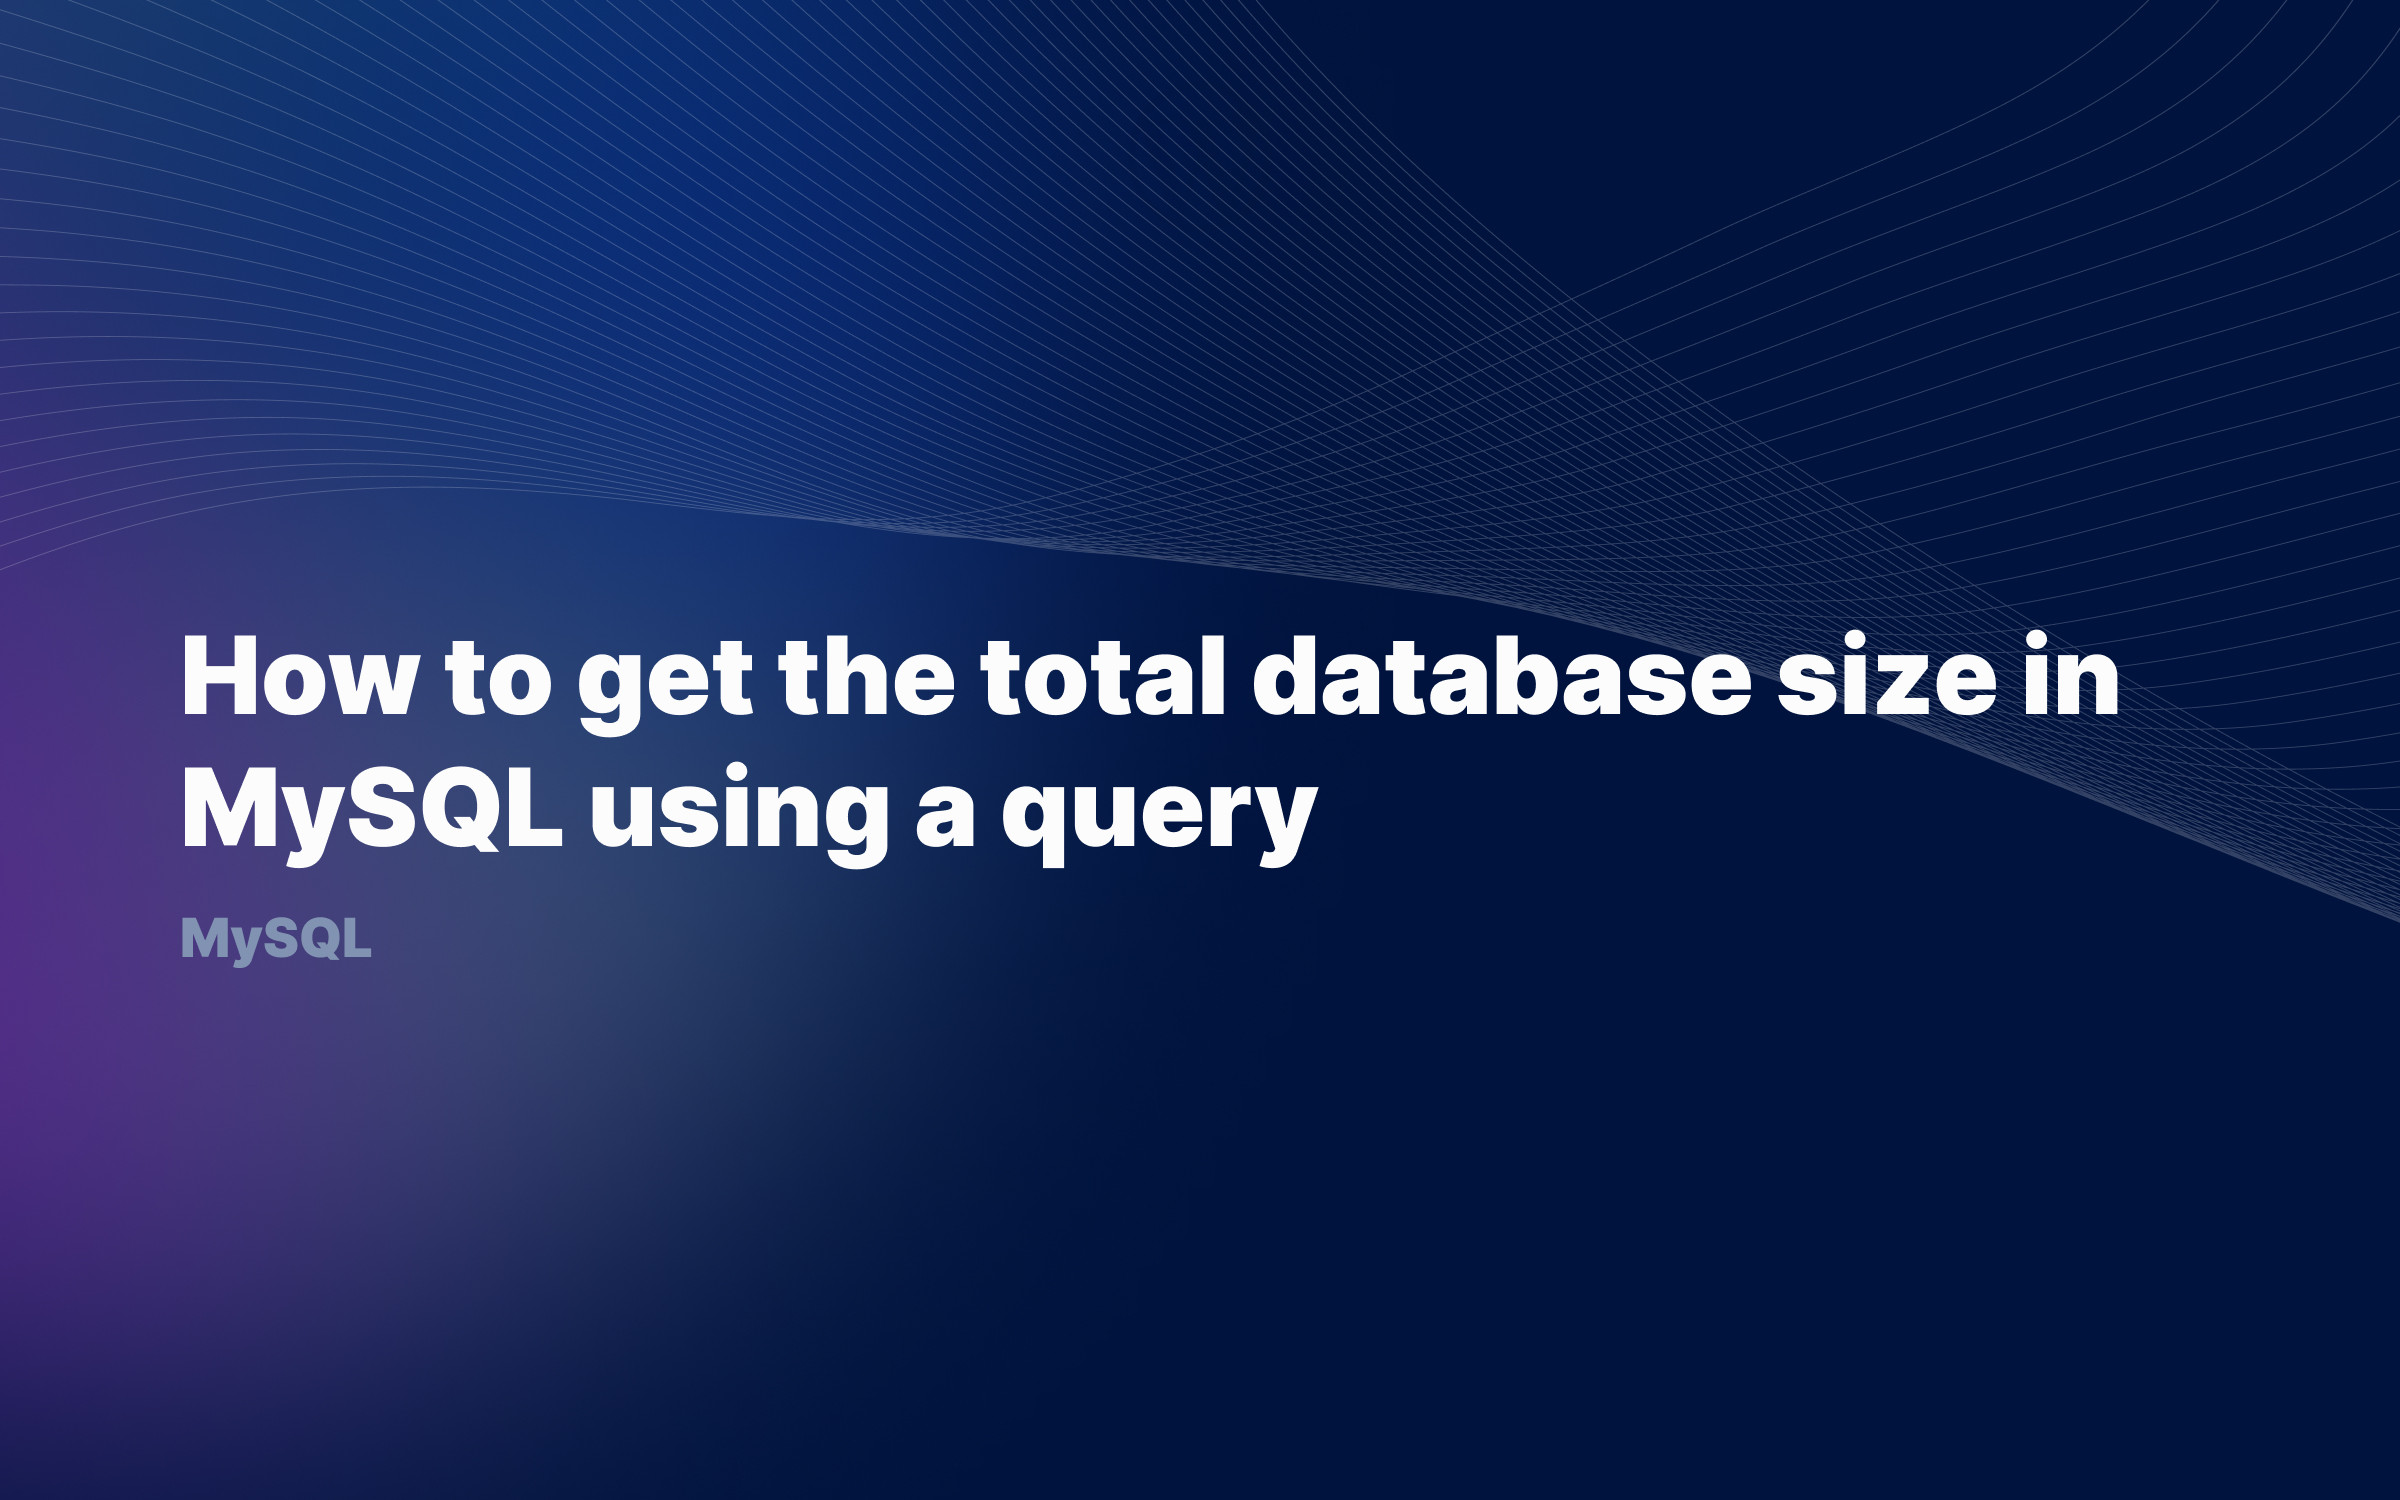 How to get the total database size in MySQL using a query